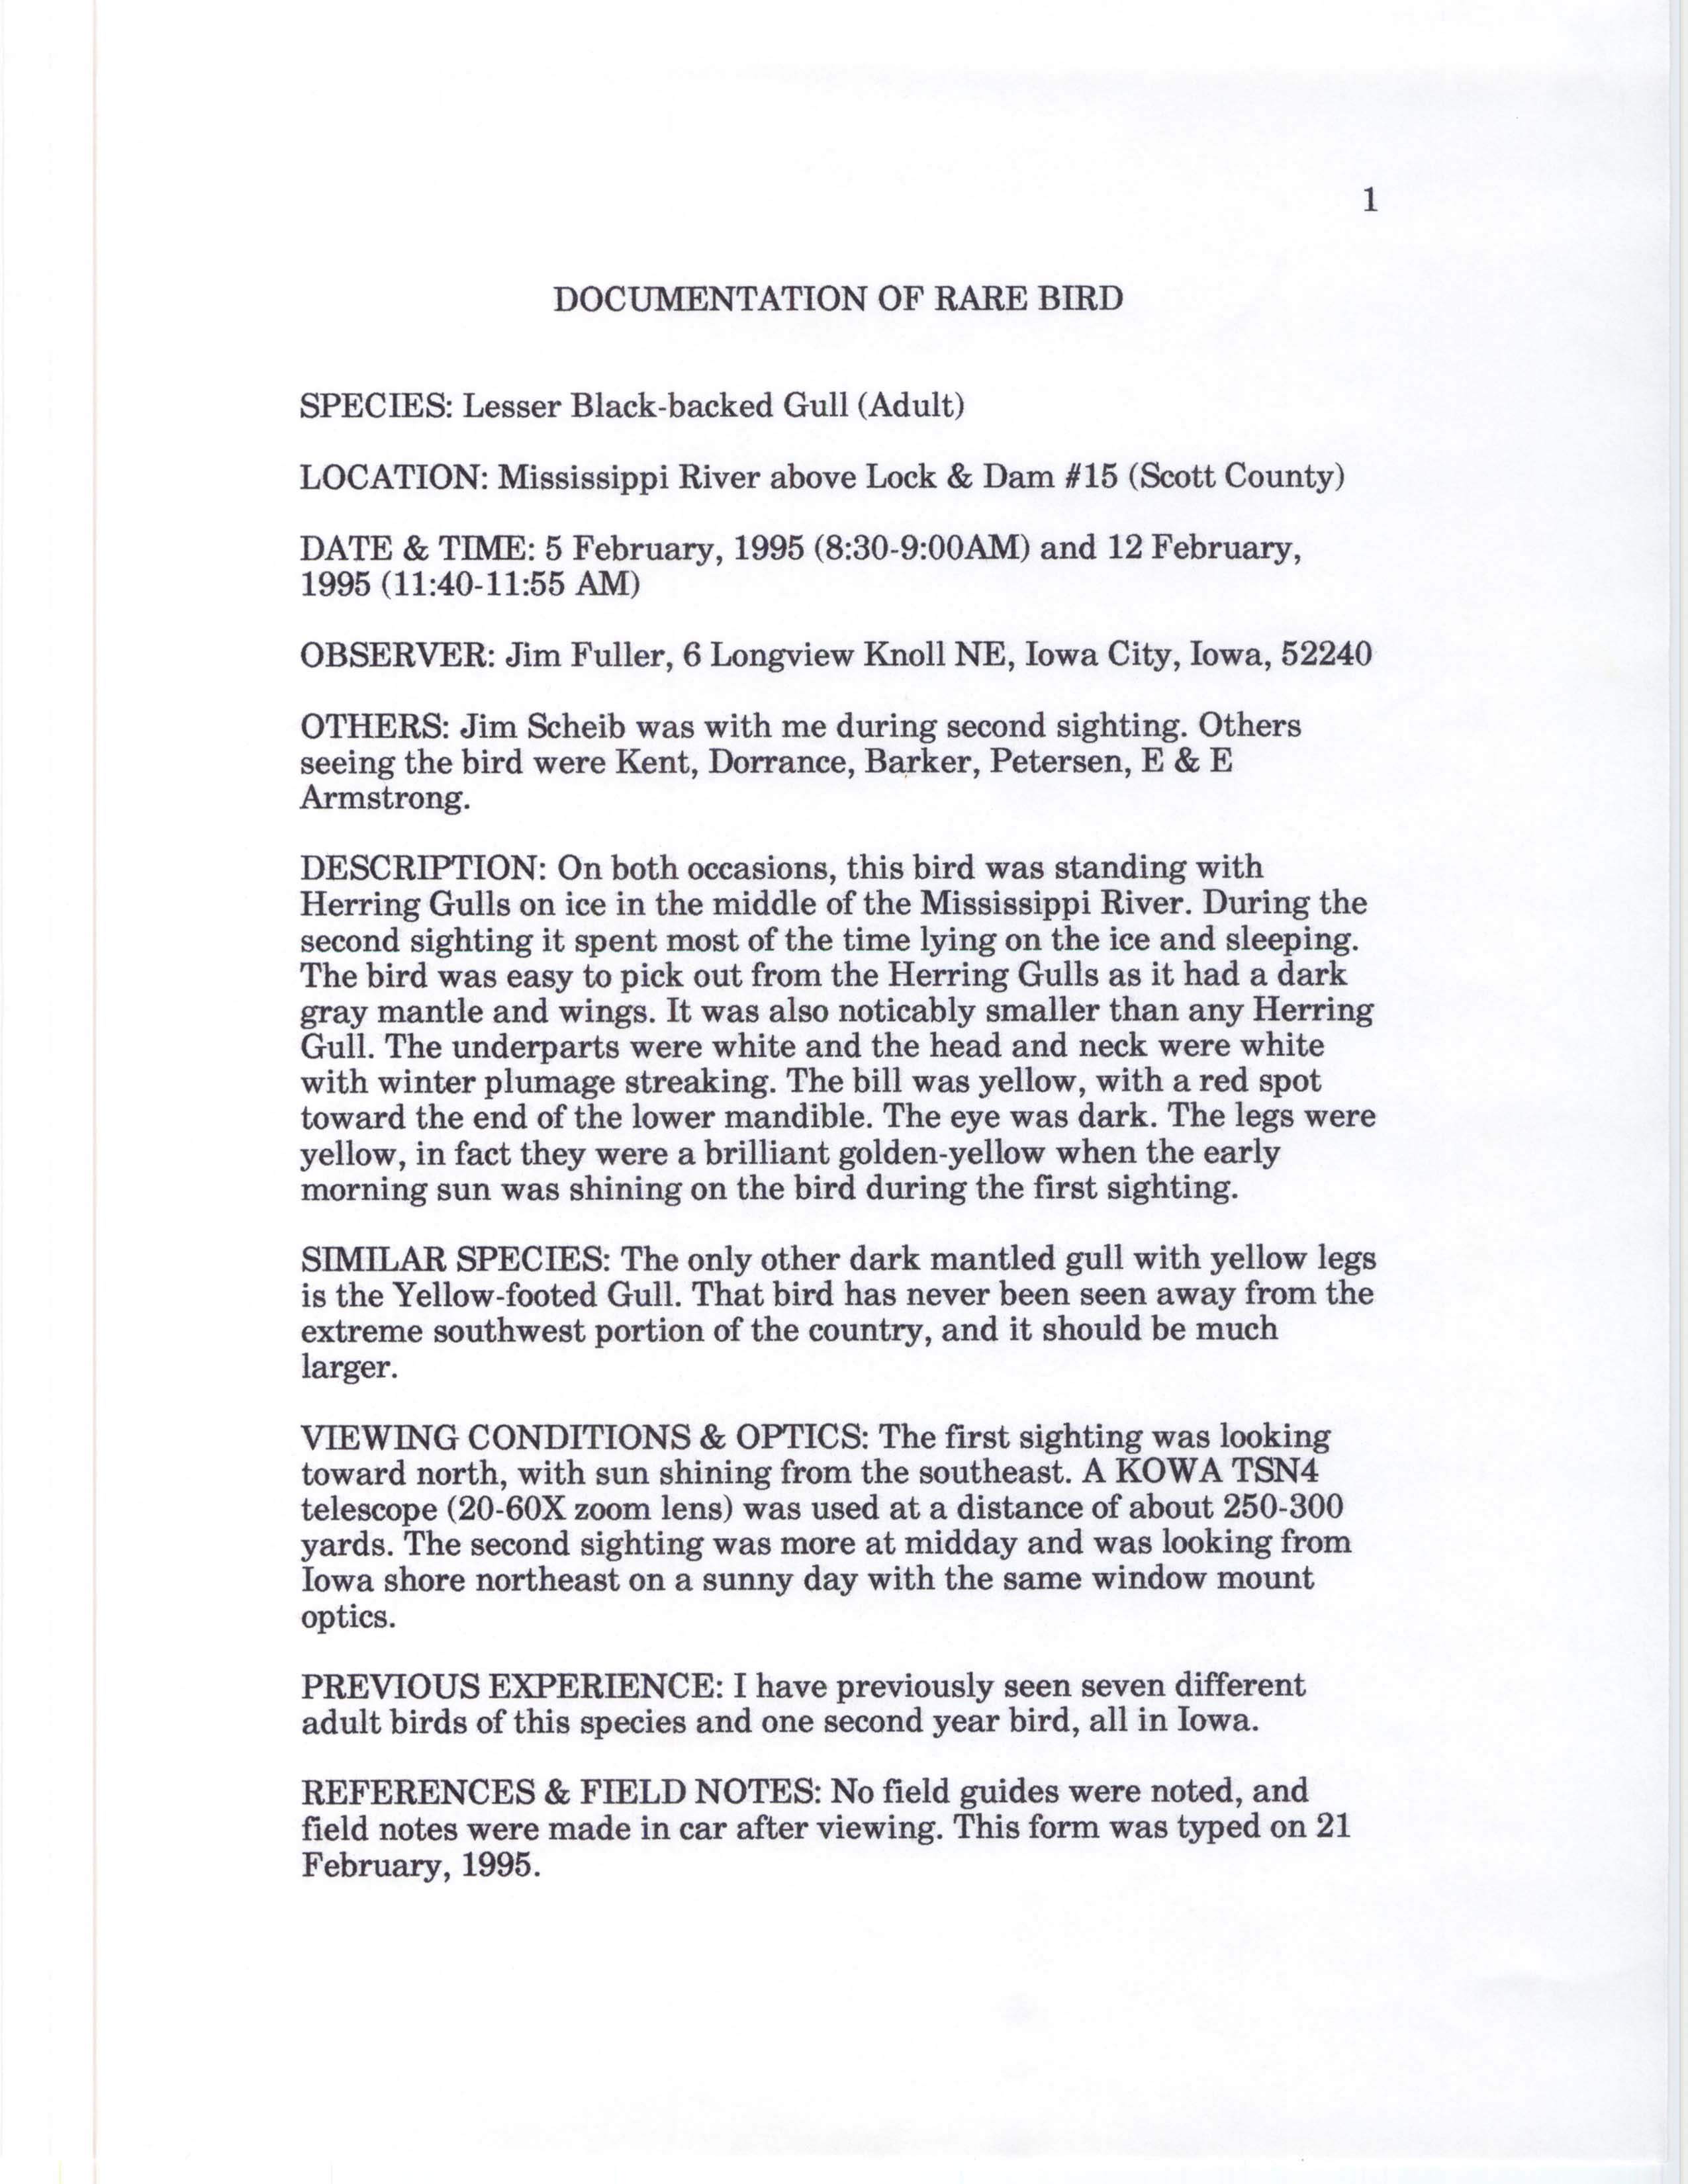 Rare bird documentation form for Lesser Black-backed Gull at Lock and Dam 15, 1995